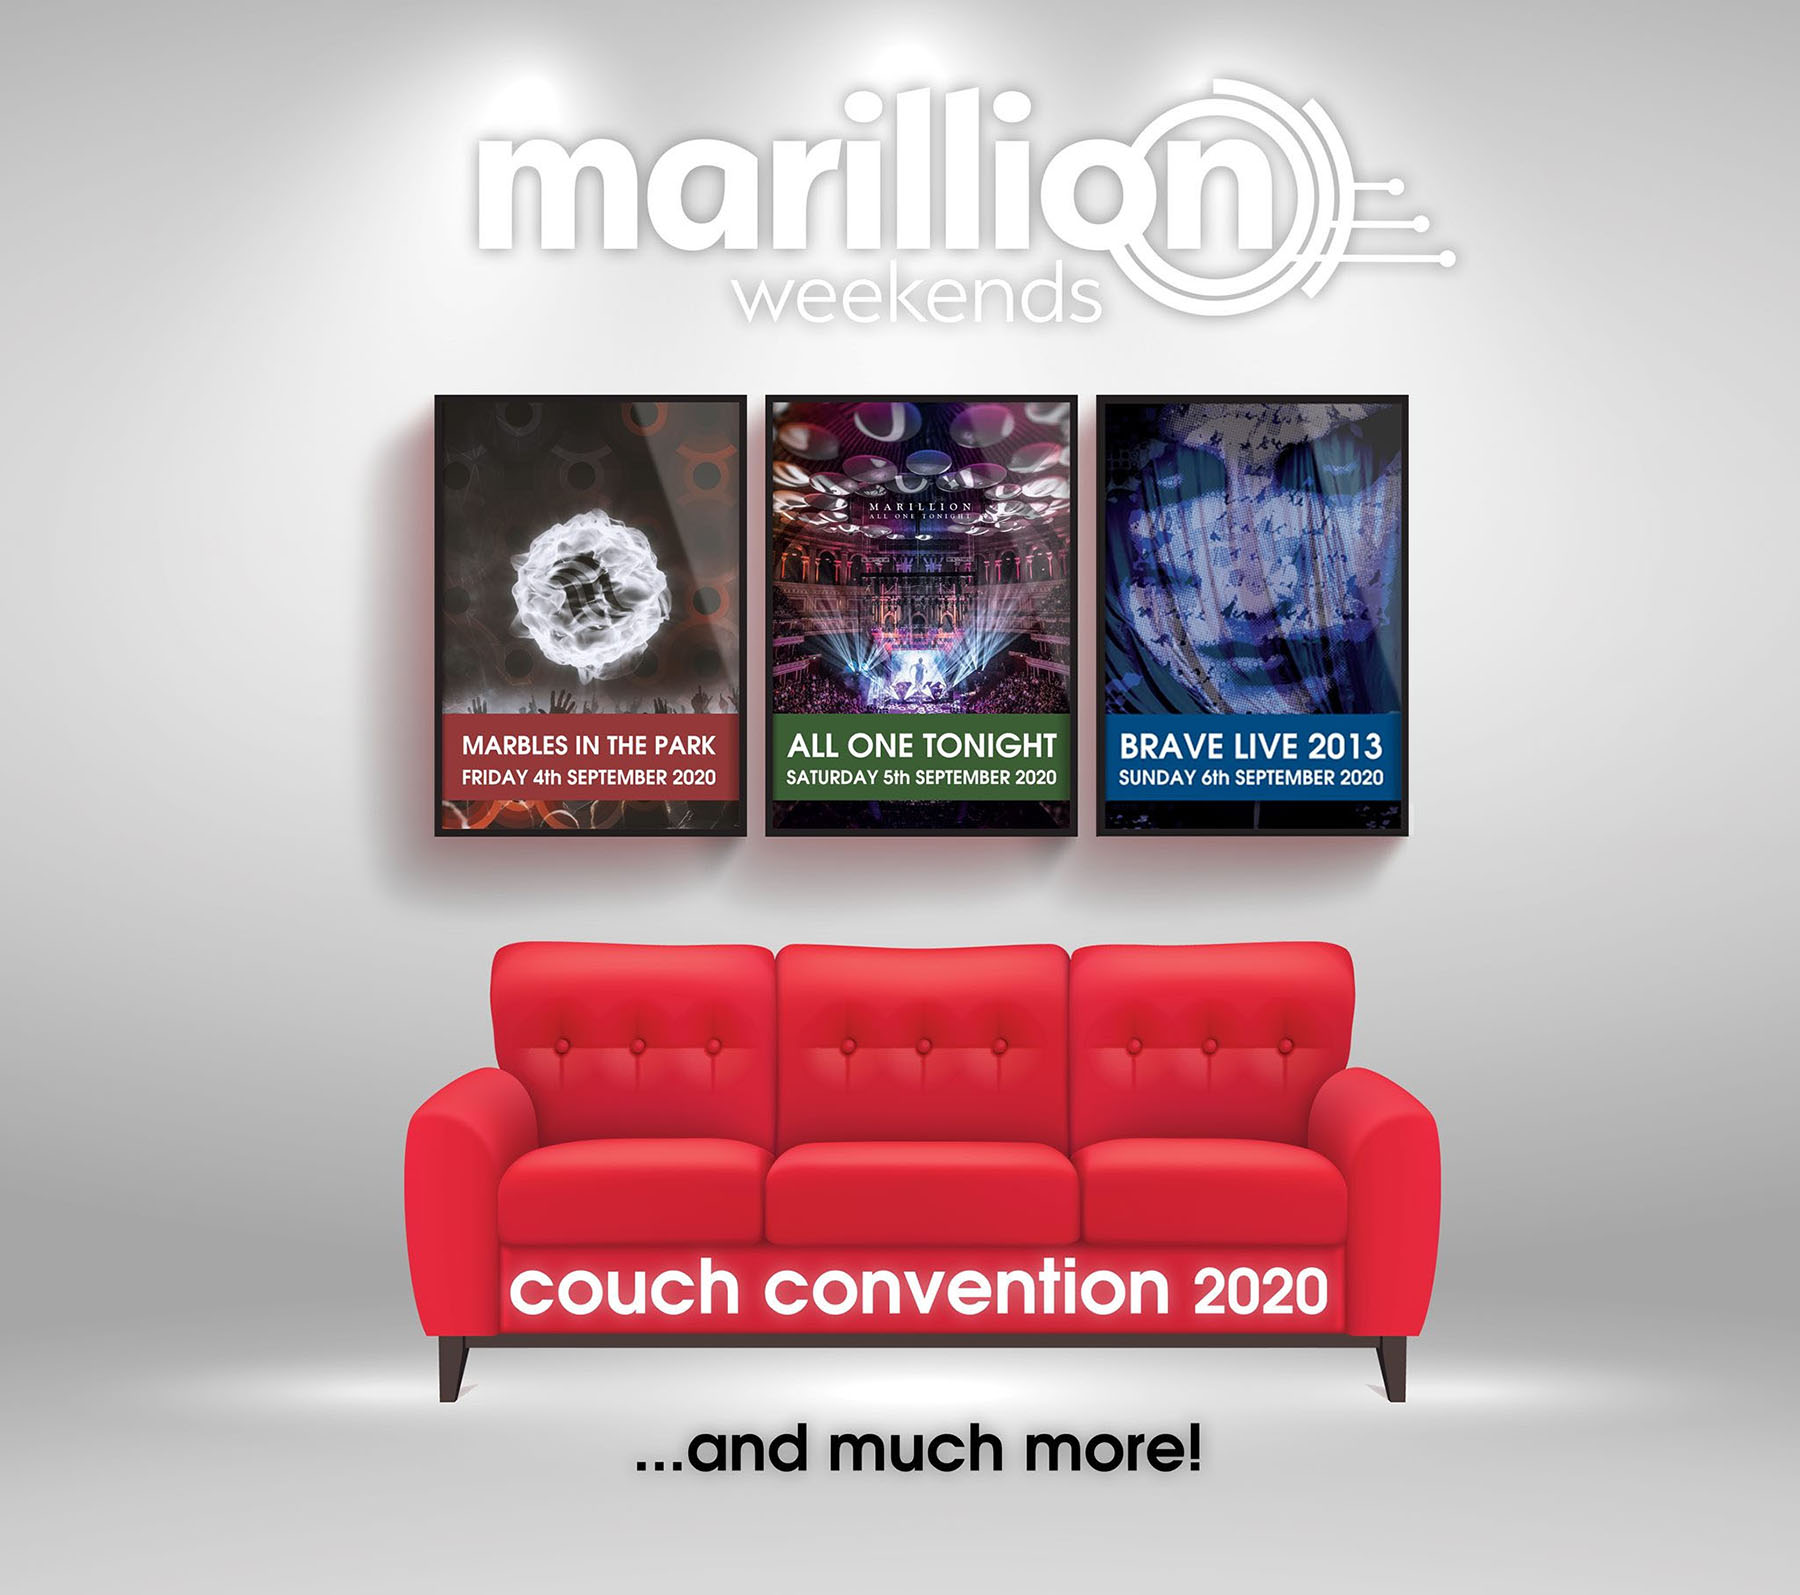 Marillion Couch Convention 2020